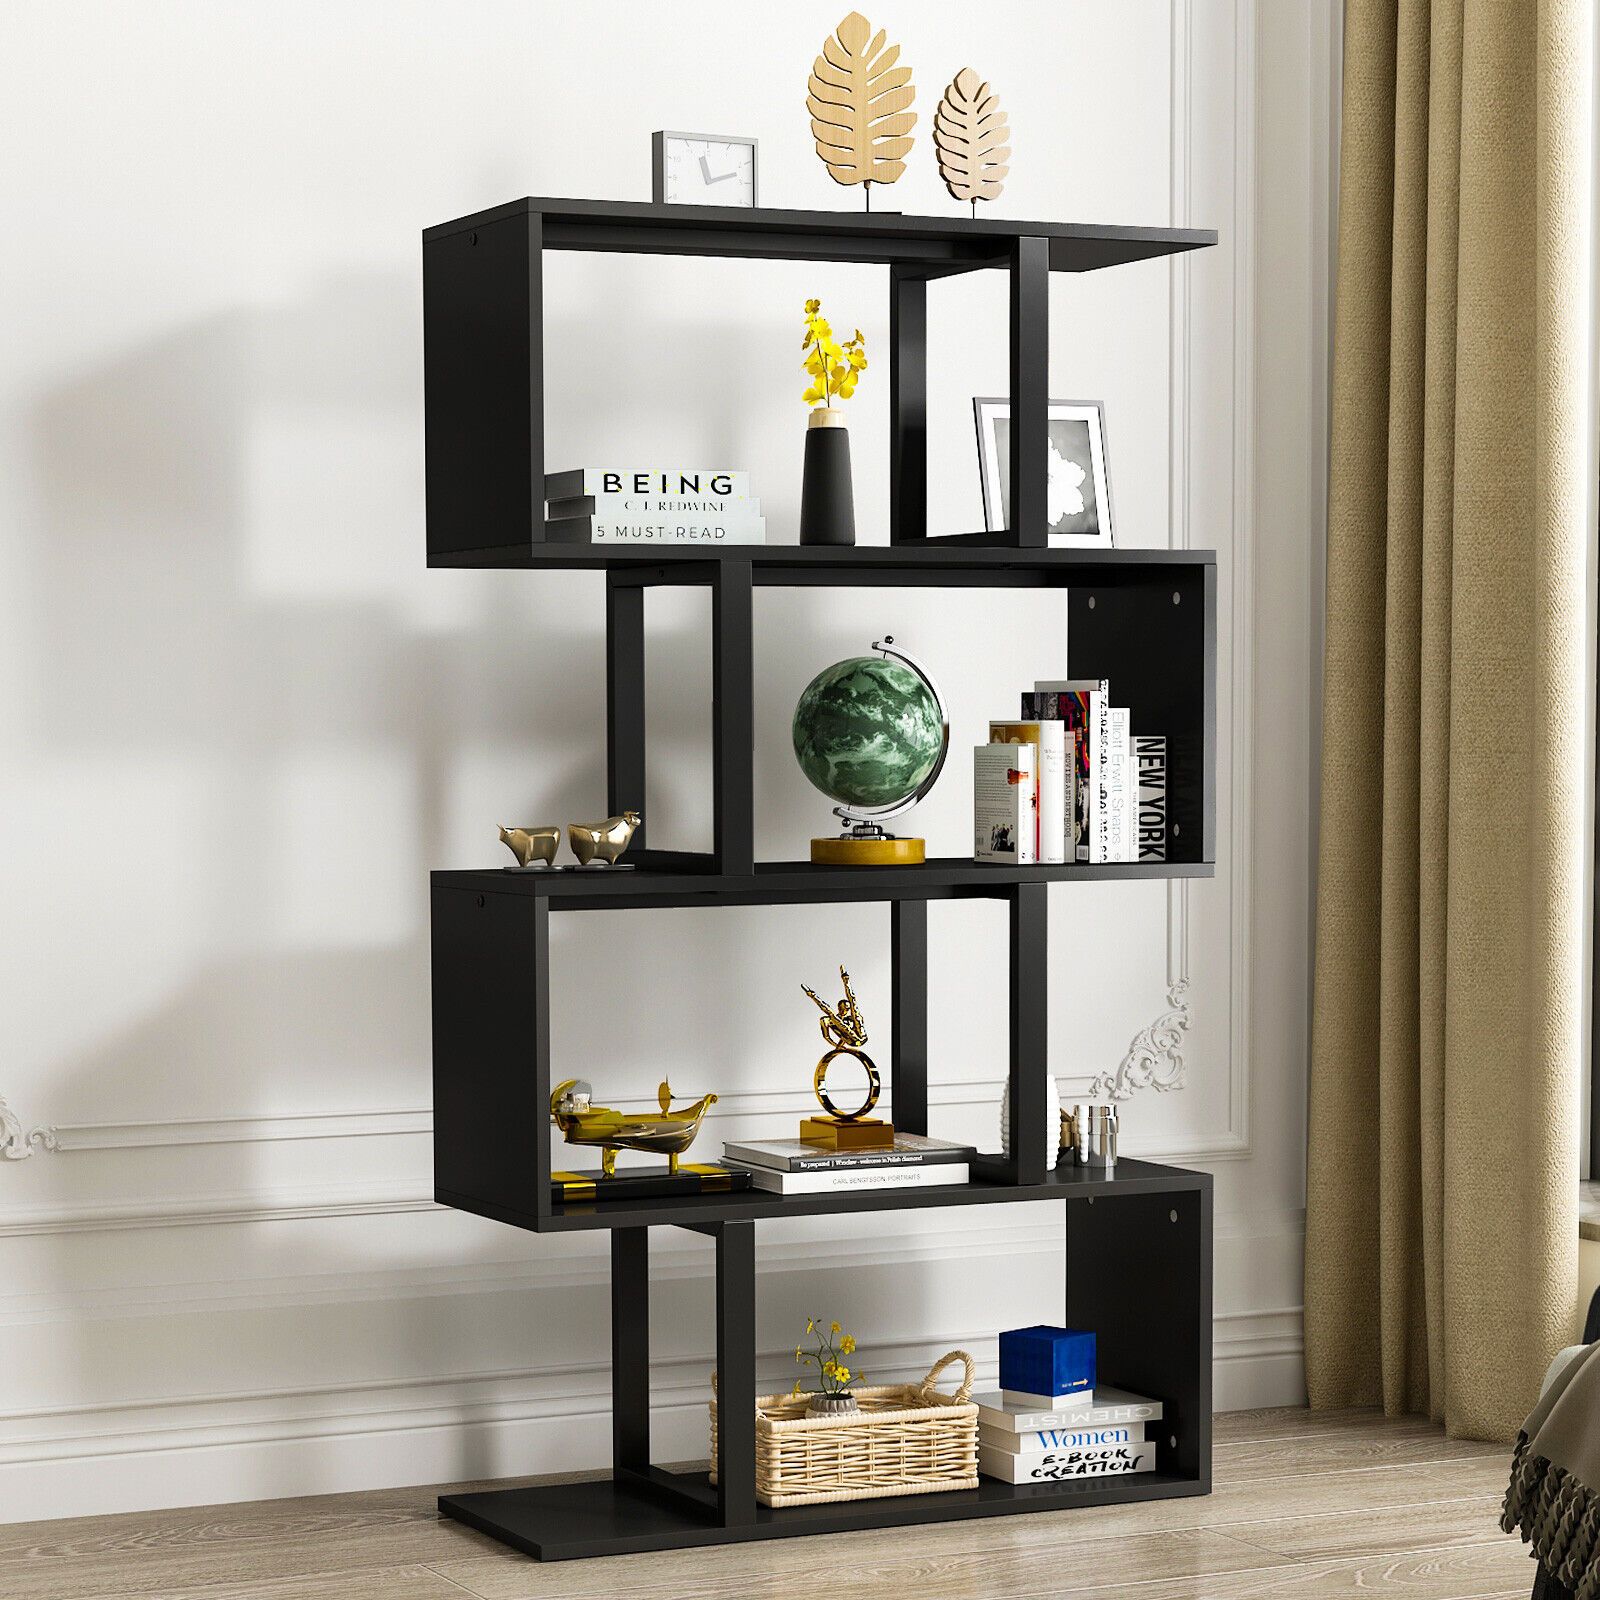 Yitahome 5 Tier Bookshelf S Shaped Z Shelf Bookshelves Bookcase Storage  Shelving | Ebay With Five Tier Bookcases (View 7 of 15)